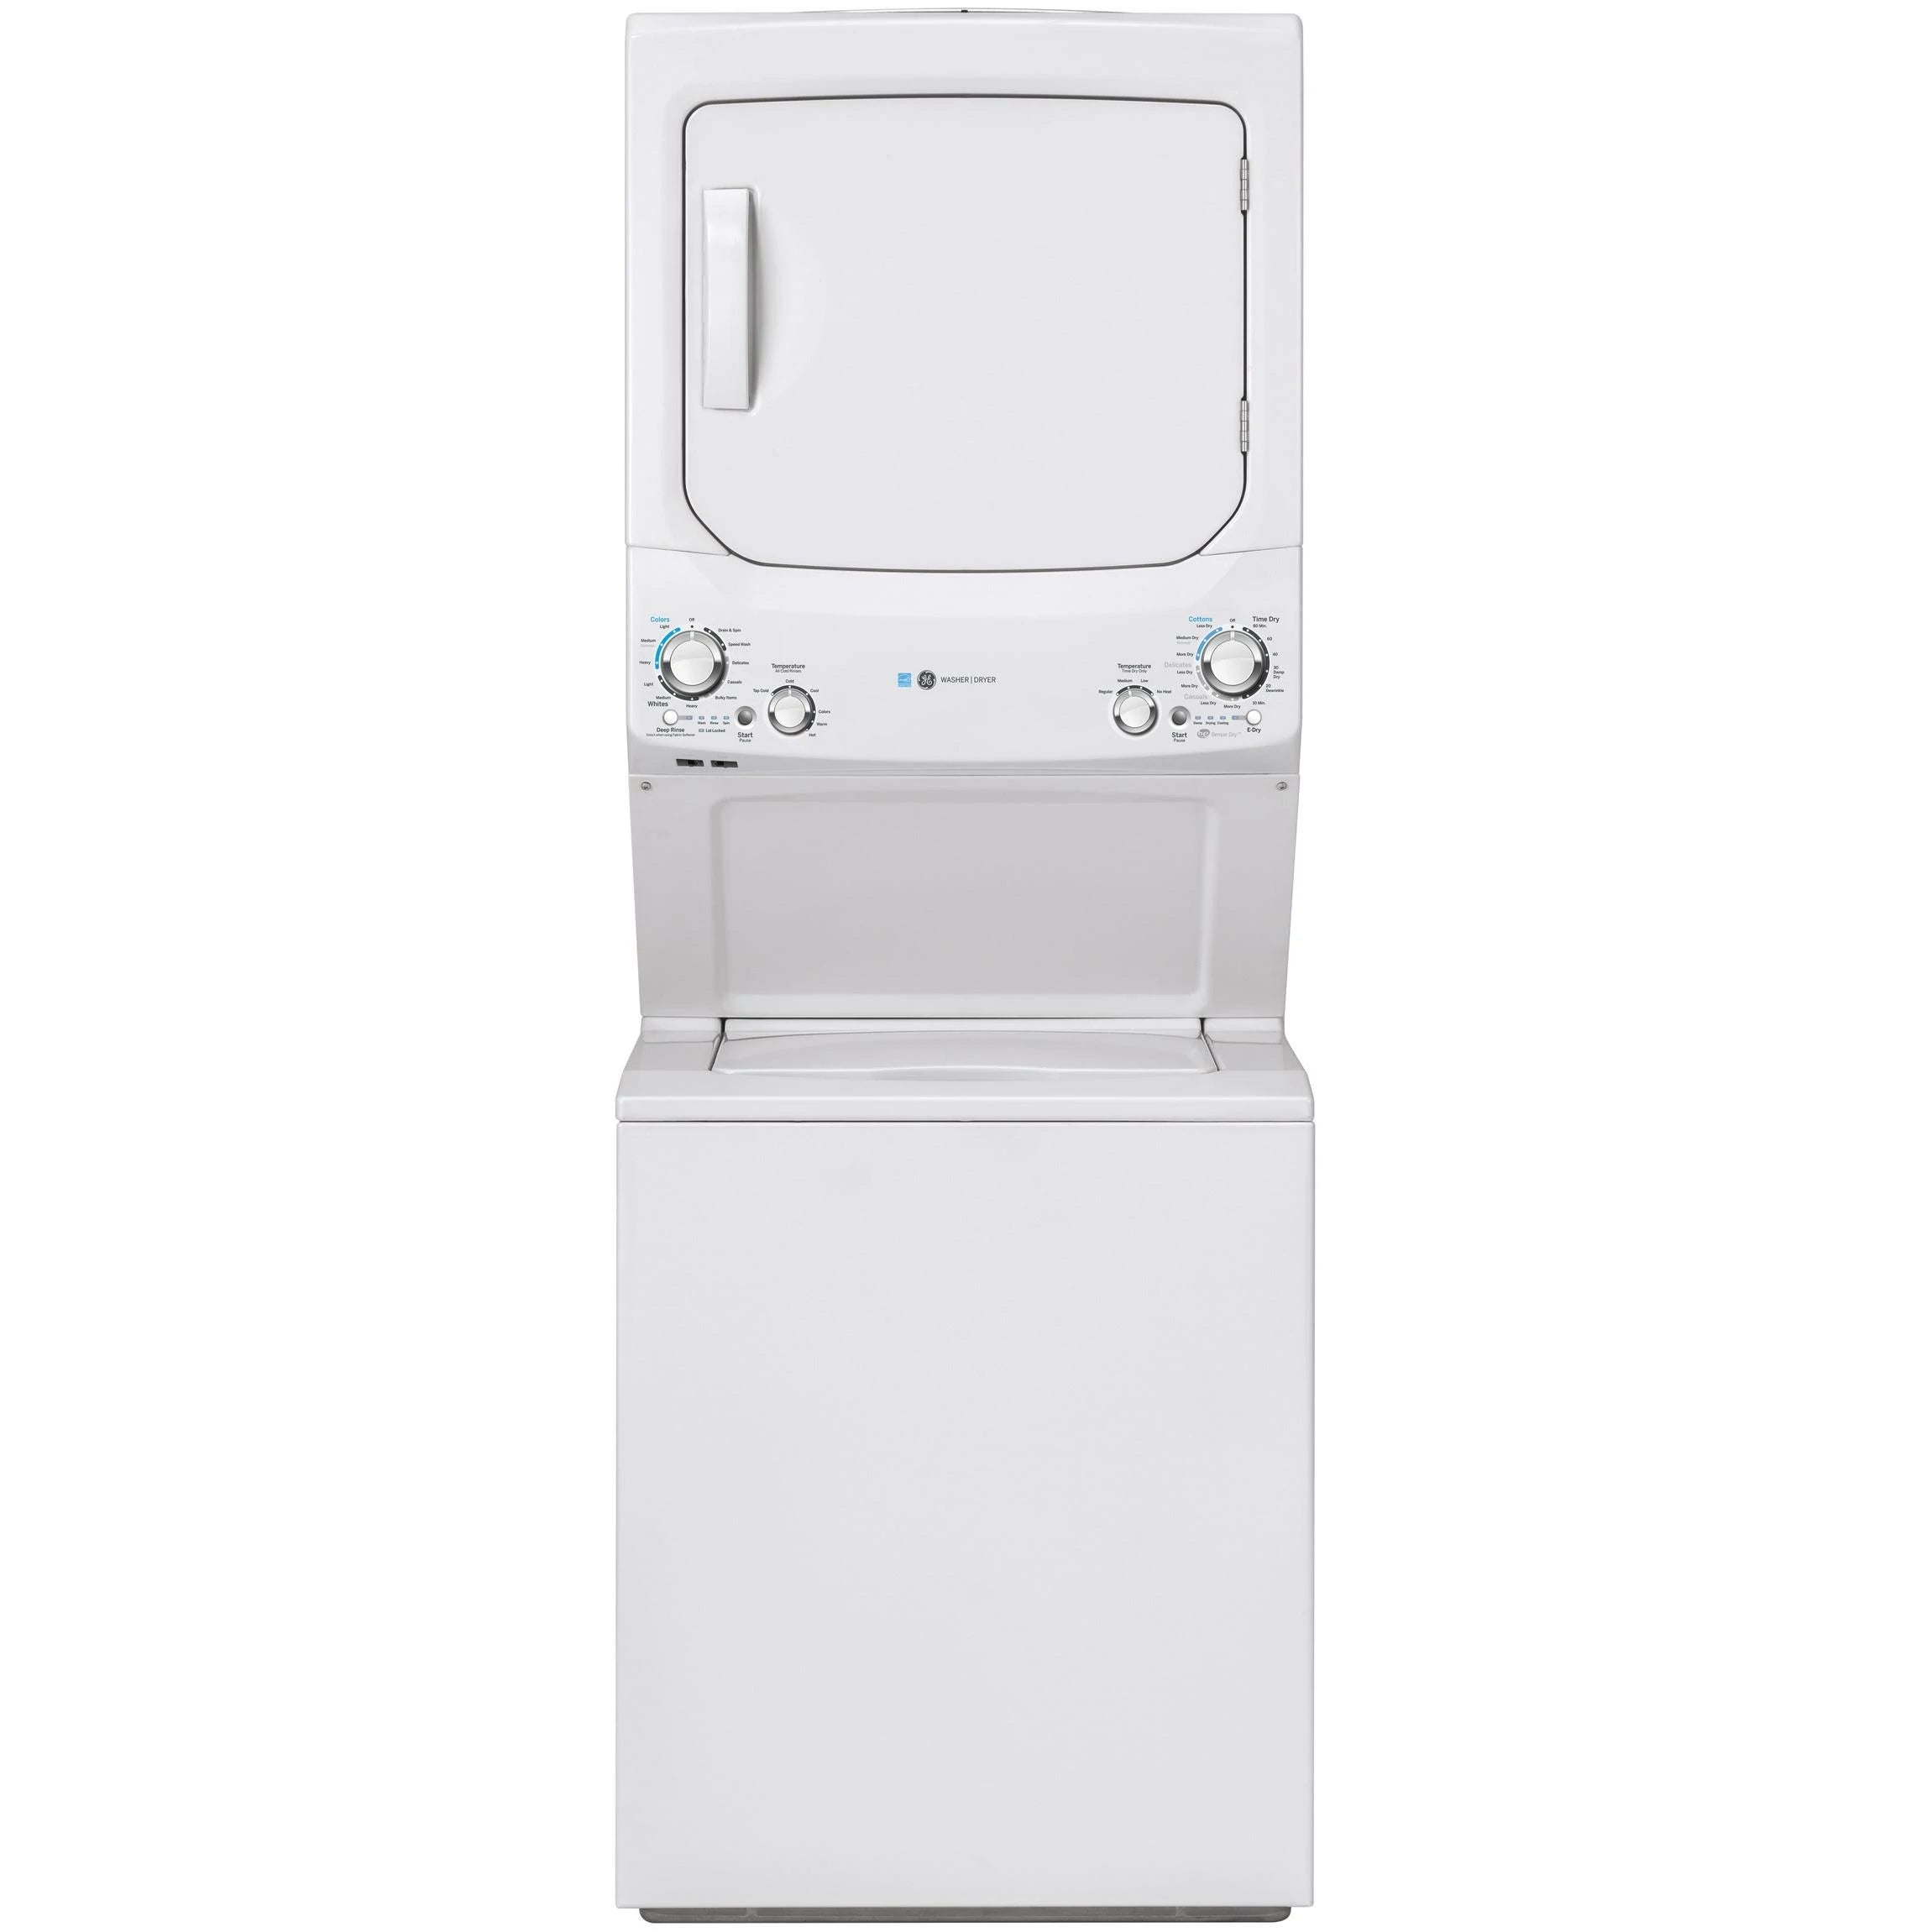 GUD27EEMNWW - LAUNDRY CENTERS - GE - Stacked Washer/Dryer - White - Open Box - LAUNDRY CENTERS - BonPrix Électroménagers